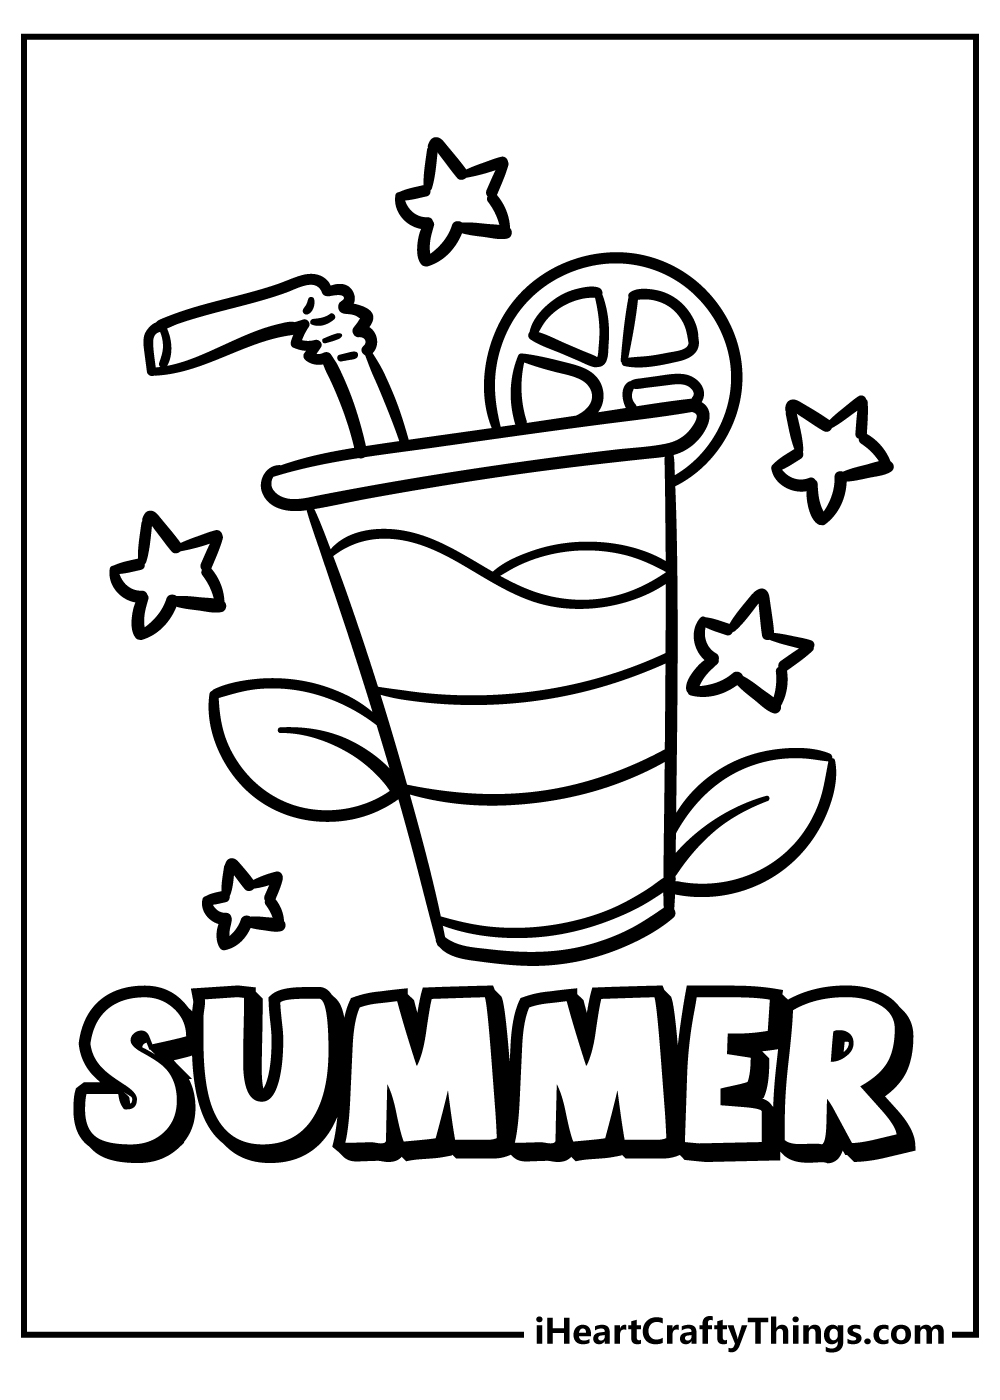 Save 60 Summer Coloring Pages Preschool Ideas 59